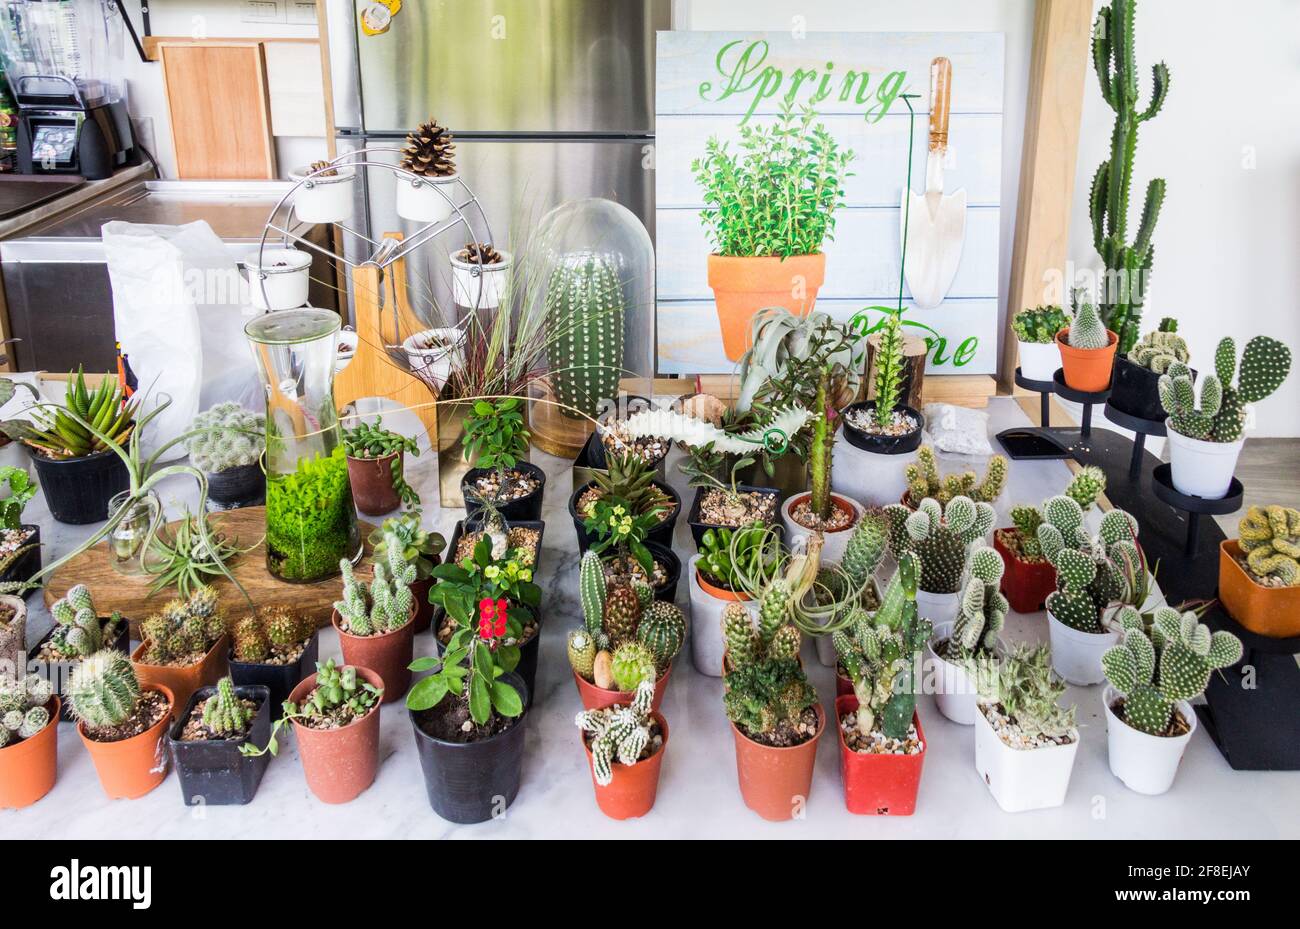 Variety of cactus plants on table Stock Photo